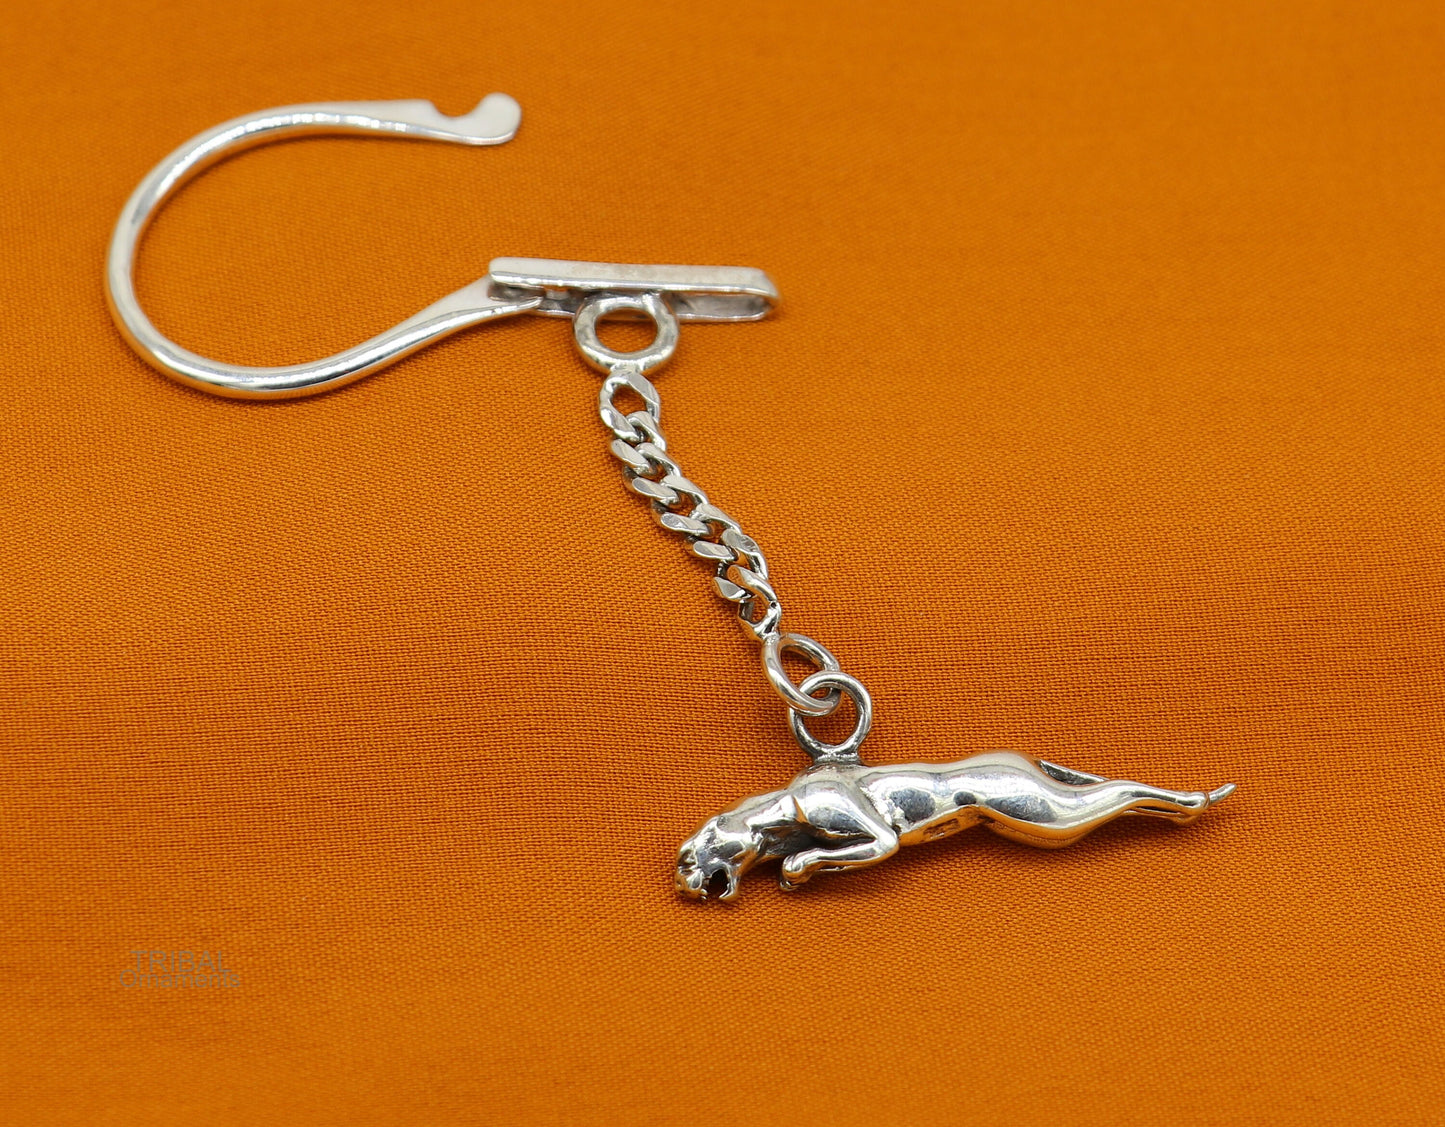 925 Sterling silver handmade unique leopard design solid key chian, stylish royal gifting silver accessories unisex gift, jewelry art kch03 - TRIBAL ORNAMENTS